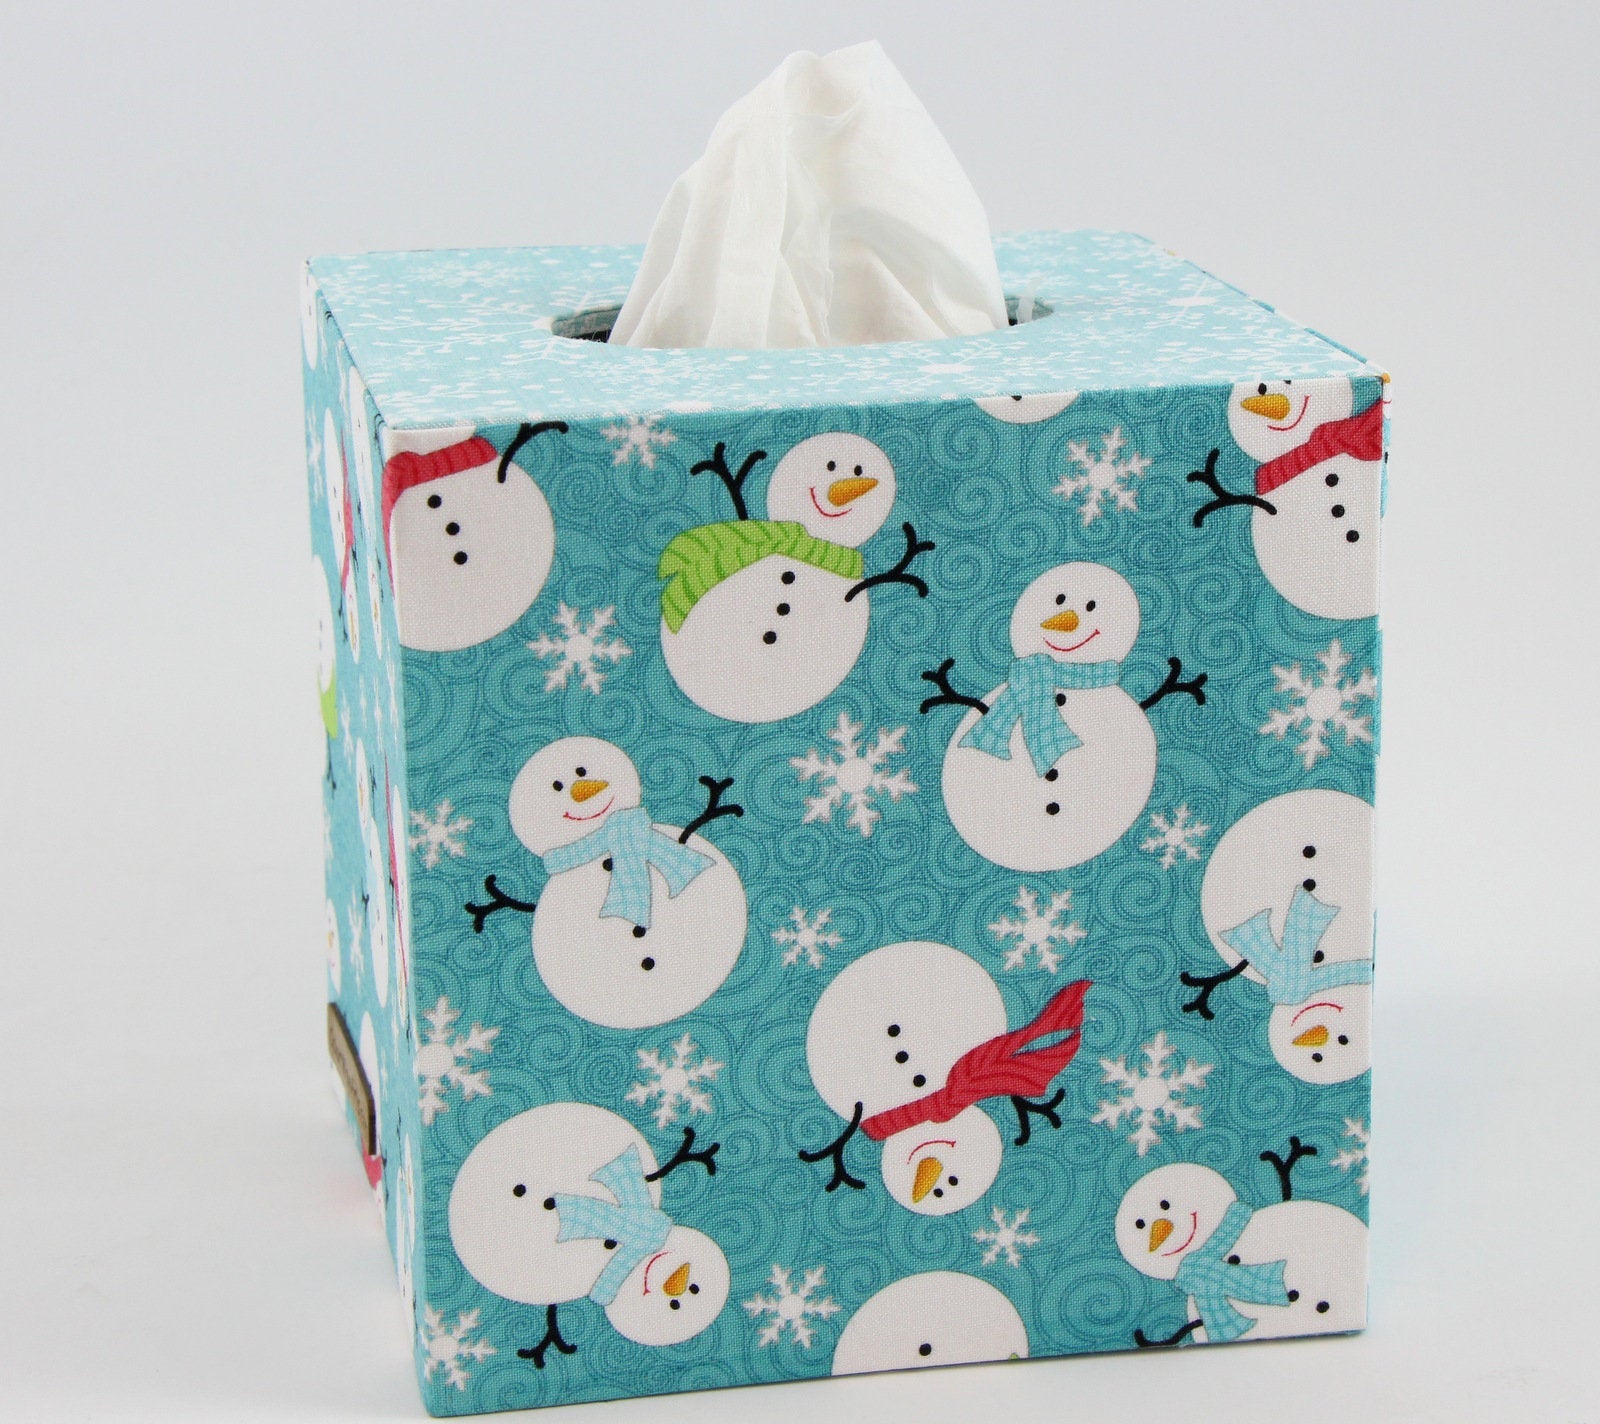 Fabric tissue box cover DIY kit - Colorway Arts